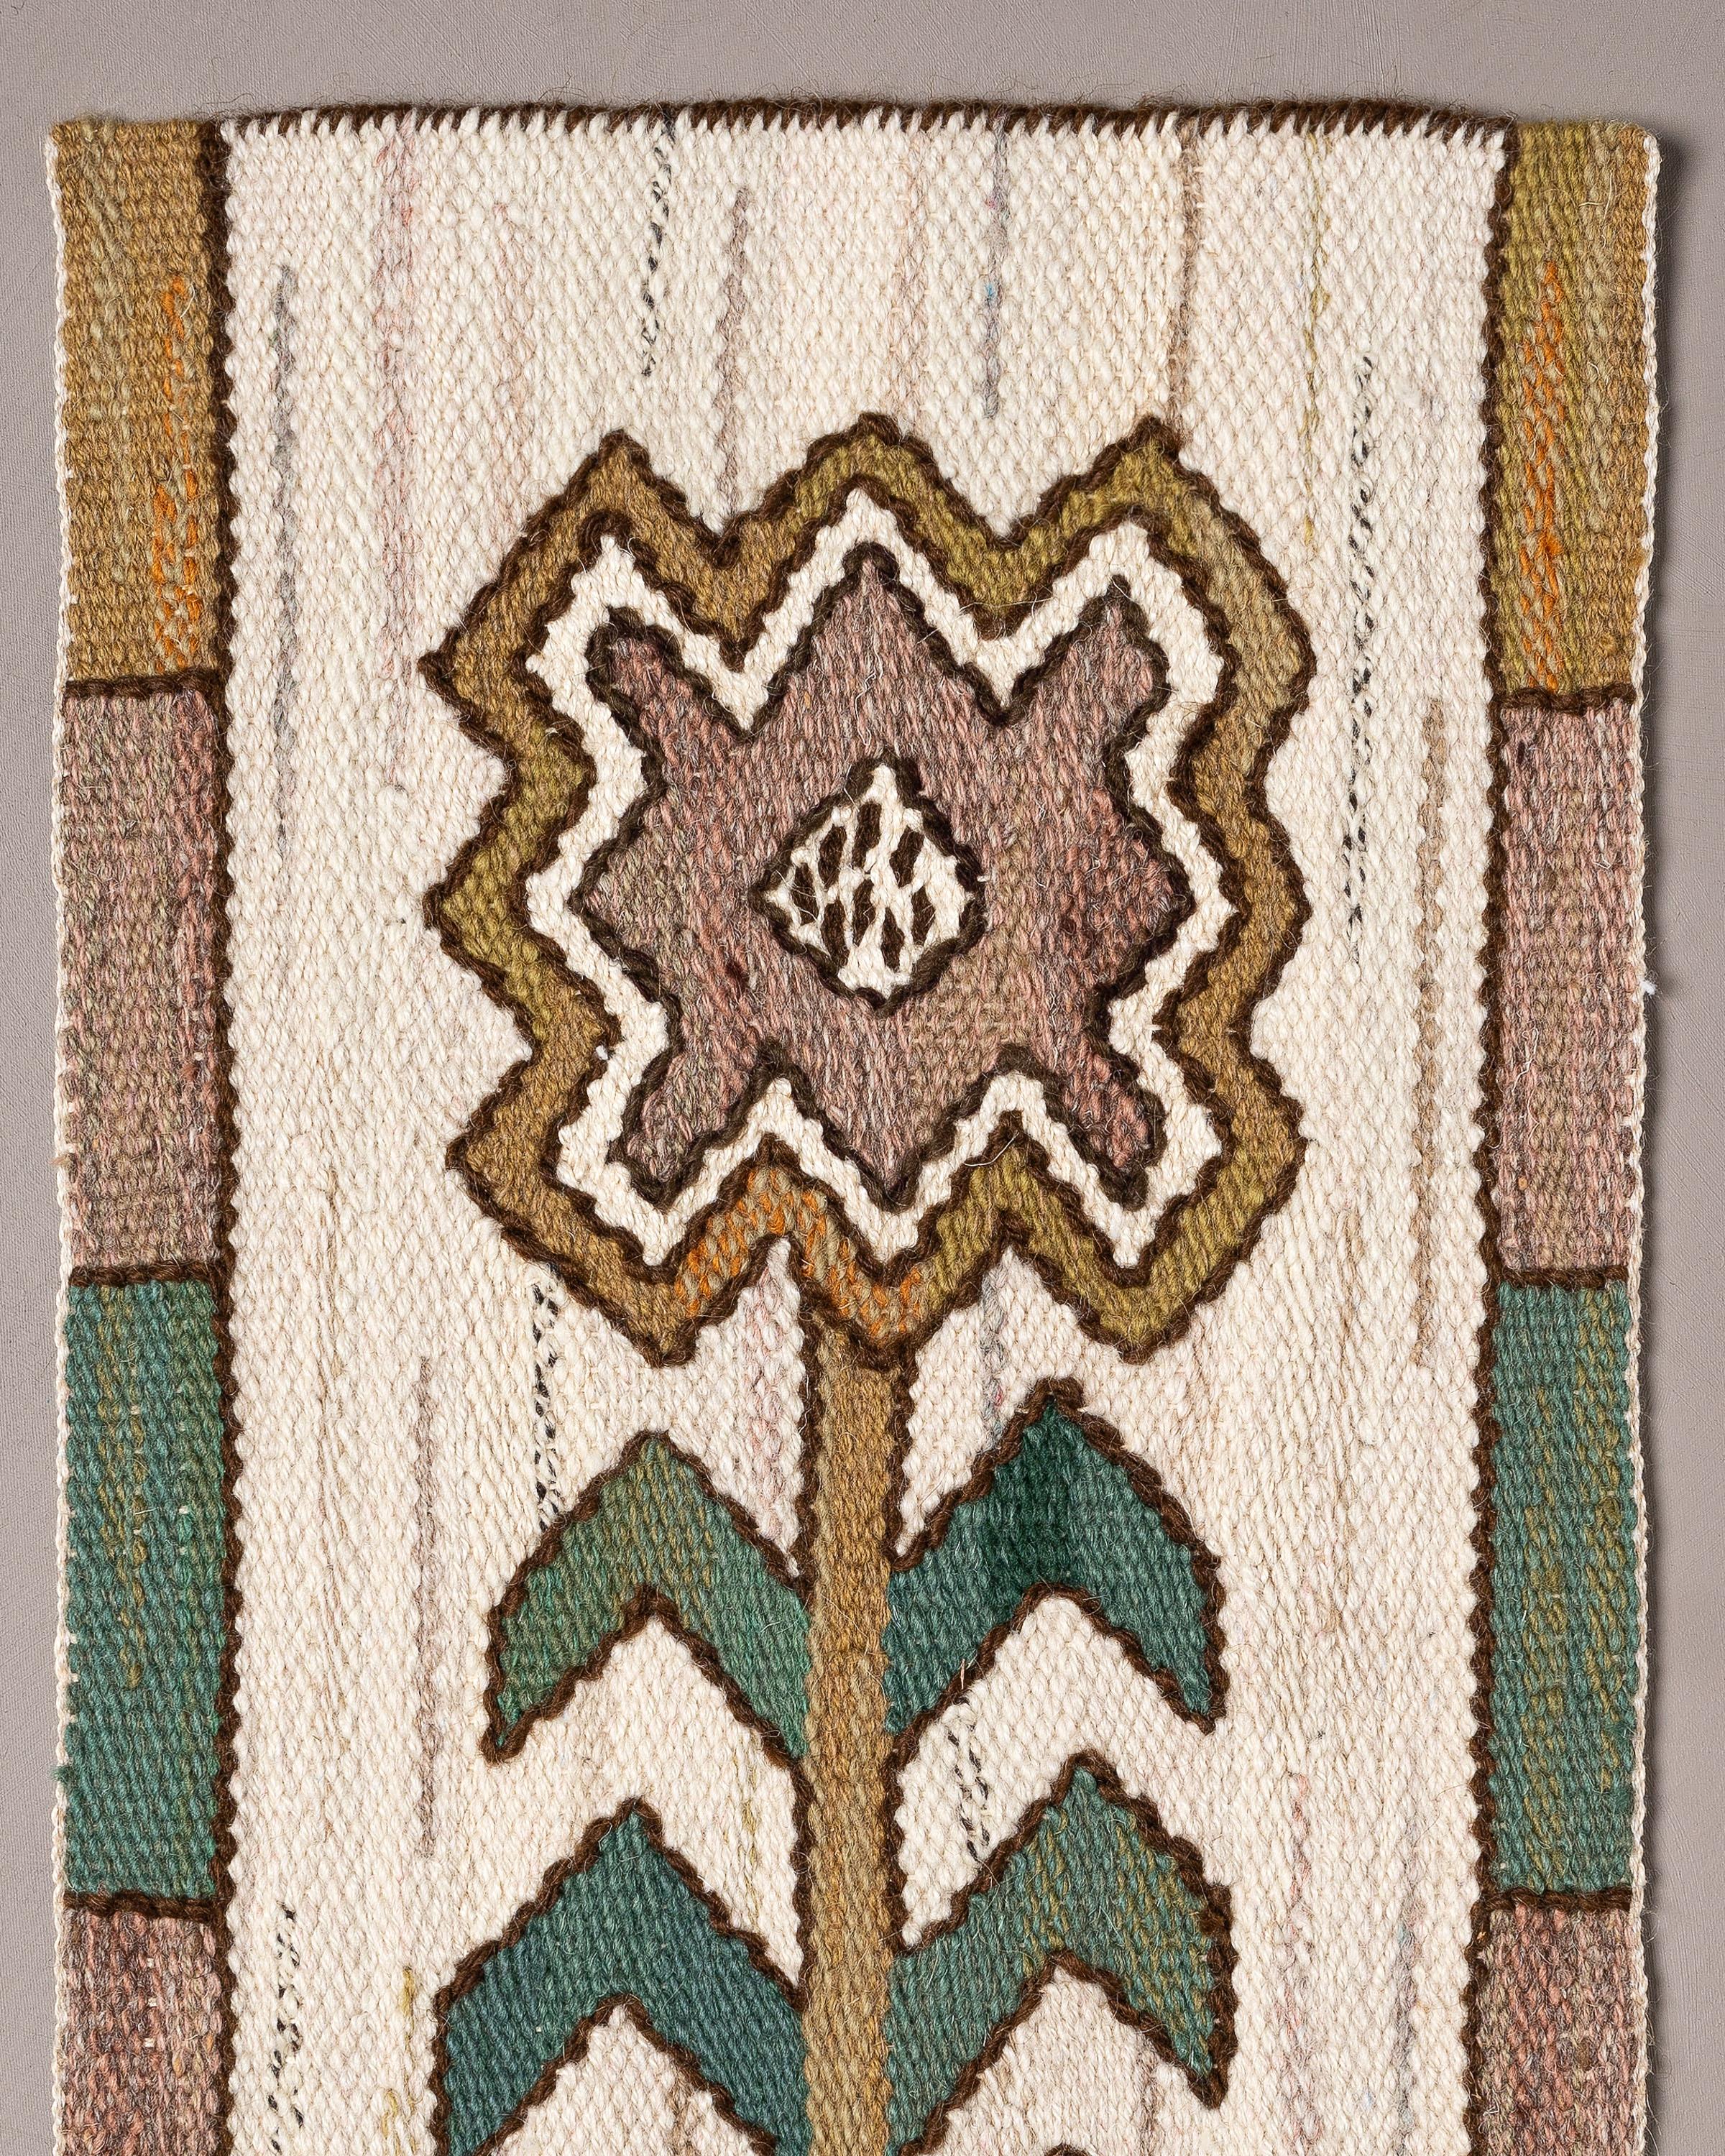 Handwoven tapestry in wool with a lily, designed by Märta Måås-Fjetterström in 1929. Detail from the wall tapestry Sländorna design by MMF. 

Woven in wool on a wool warp by artisan weaver Margareta Westdahl in 2008 at the Märta Måås-Fjetterström